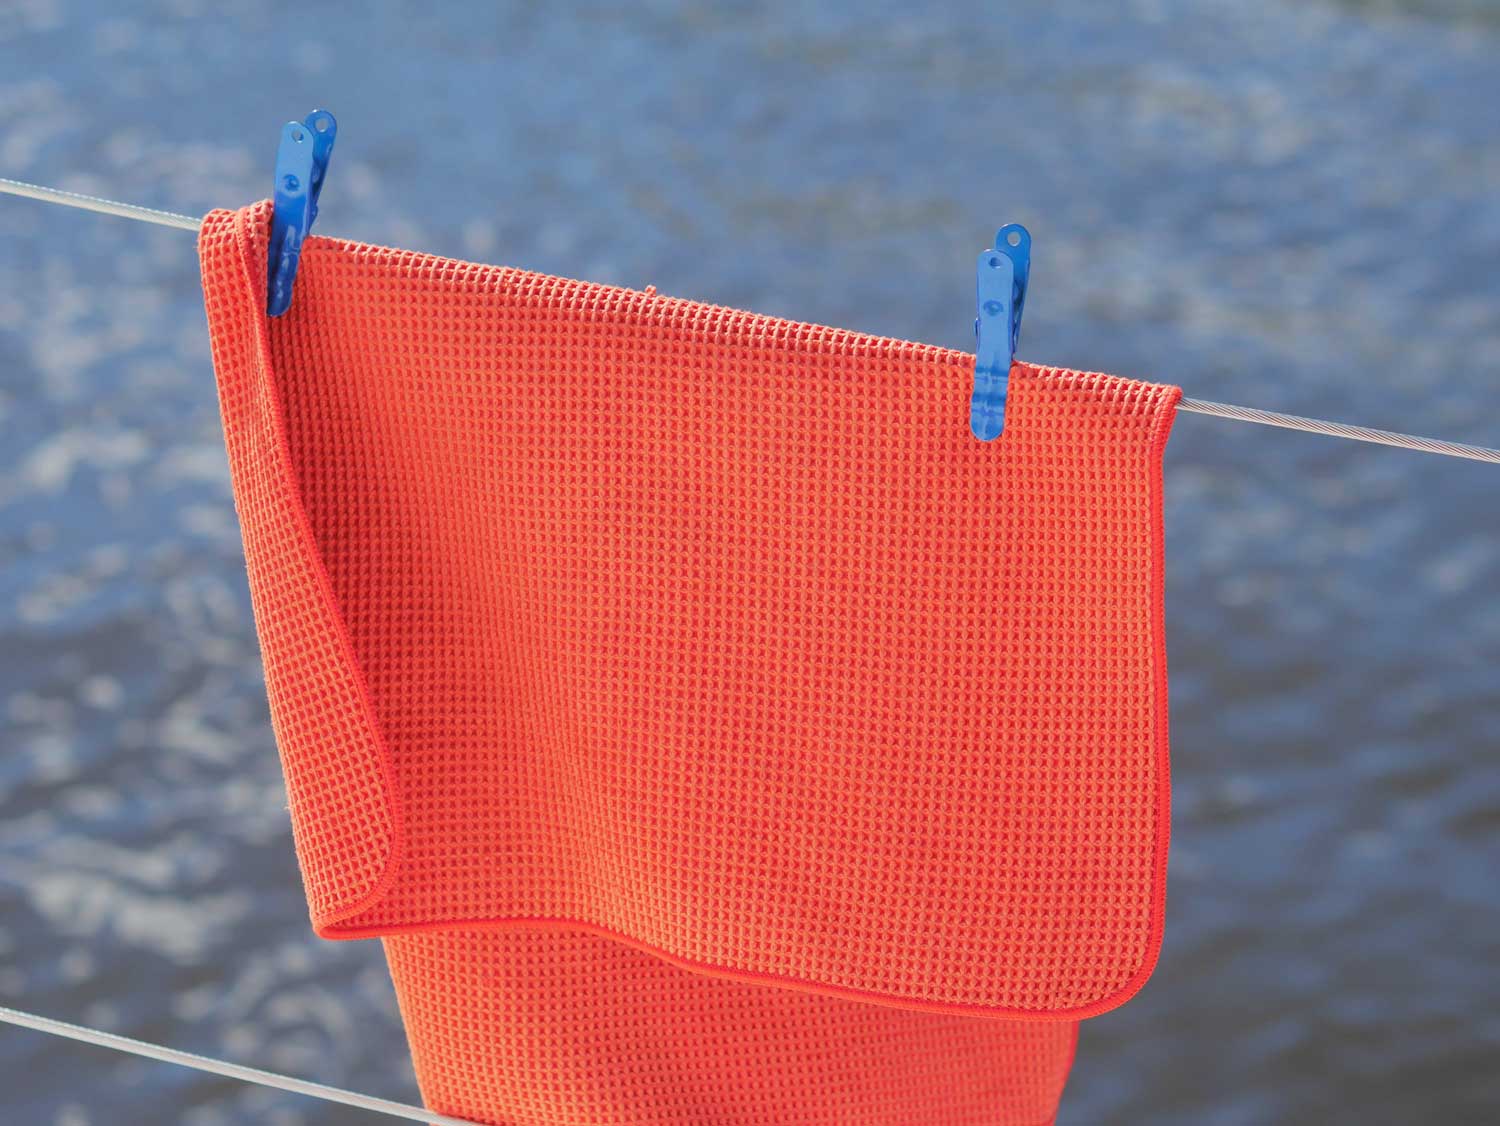 clothespin holding towel on lifeline of boat